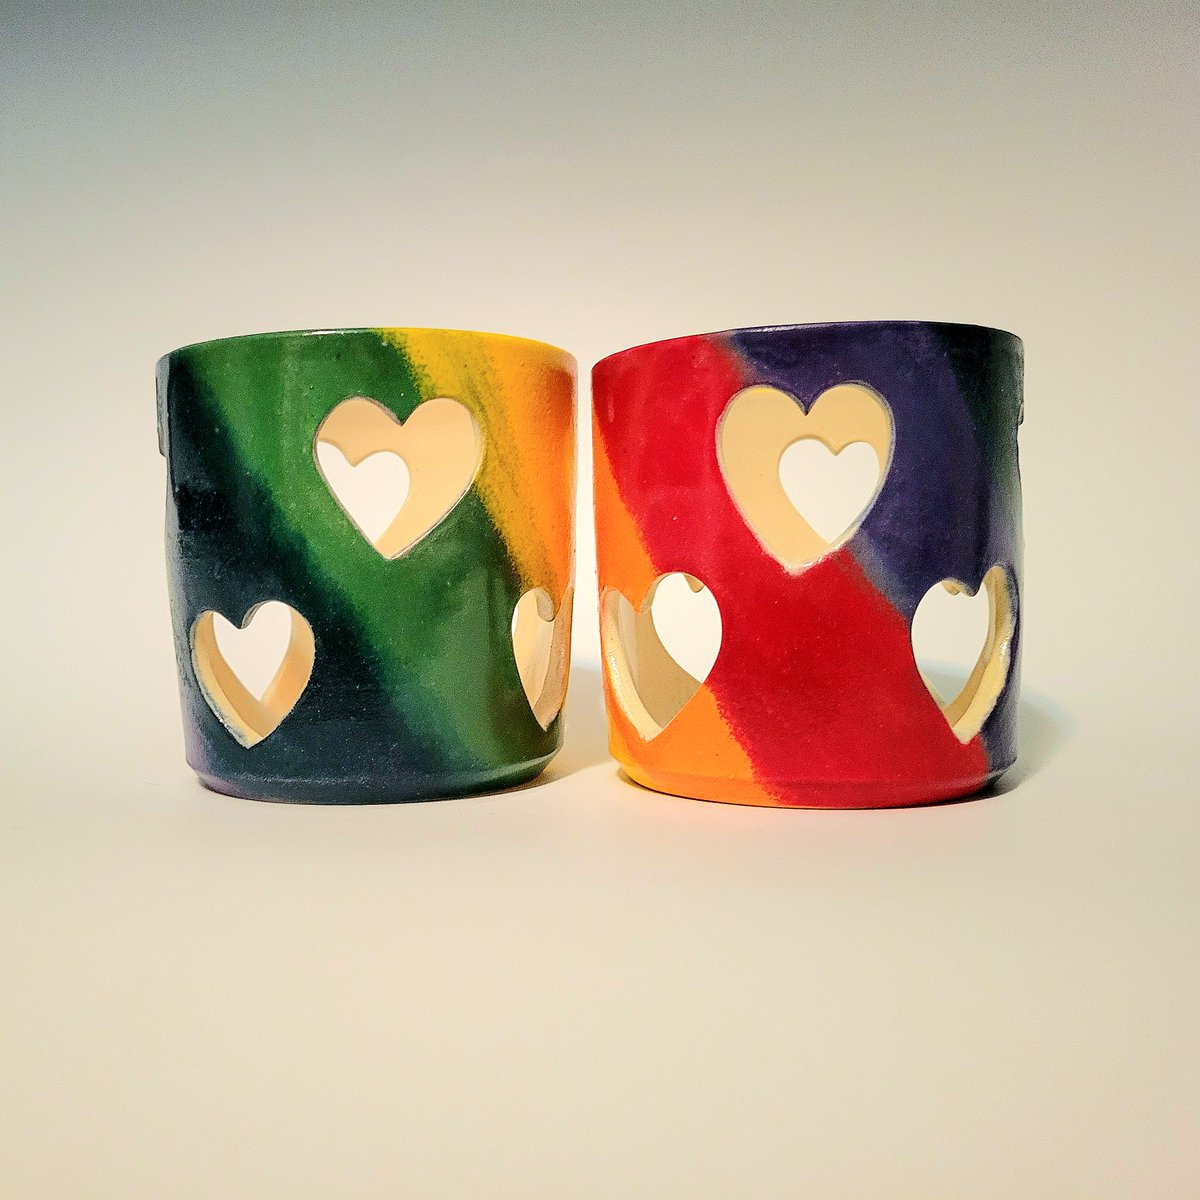 Valentine's Day is coming sooner than you think!  buff.ly/3ixaMAe #loveislove #glaze #clayart #potterystudio #contemporaryart #handcrafted #love #ceramicdesign #potterylife #potter #artwork #wheelthrownpottery